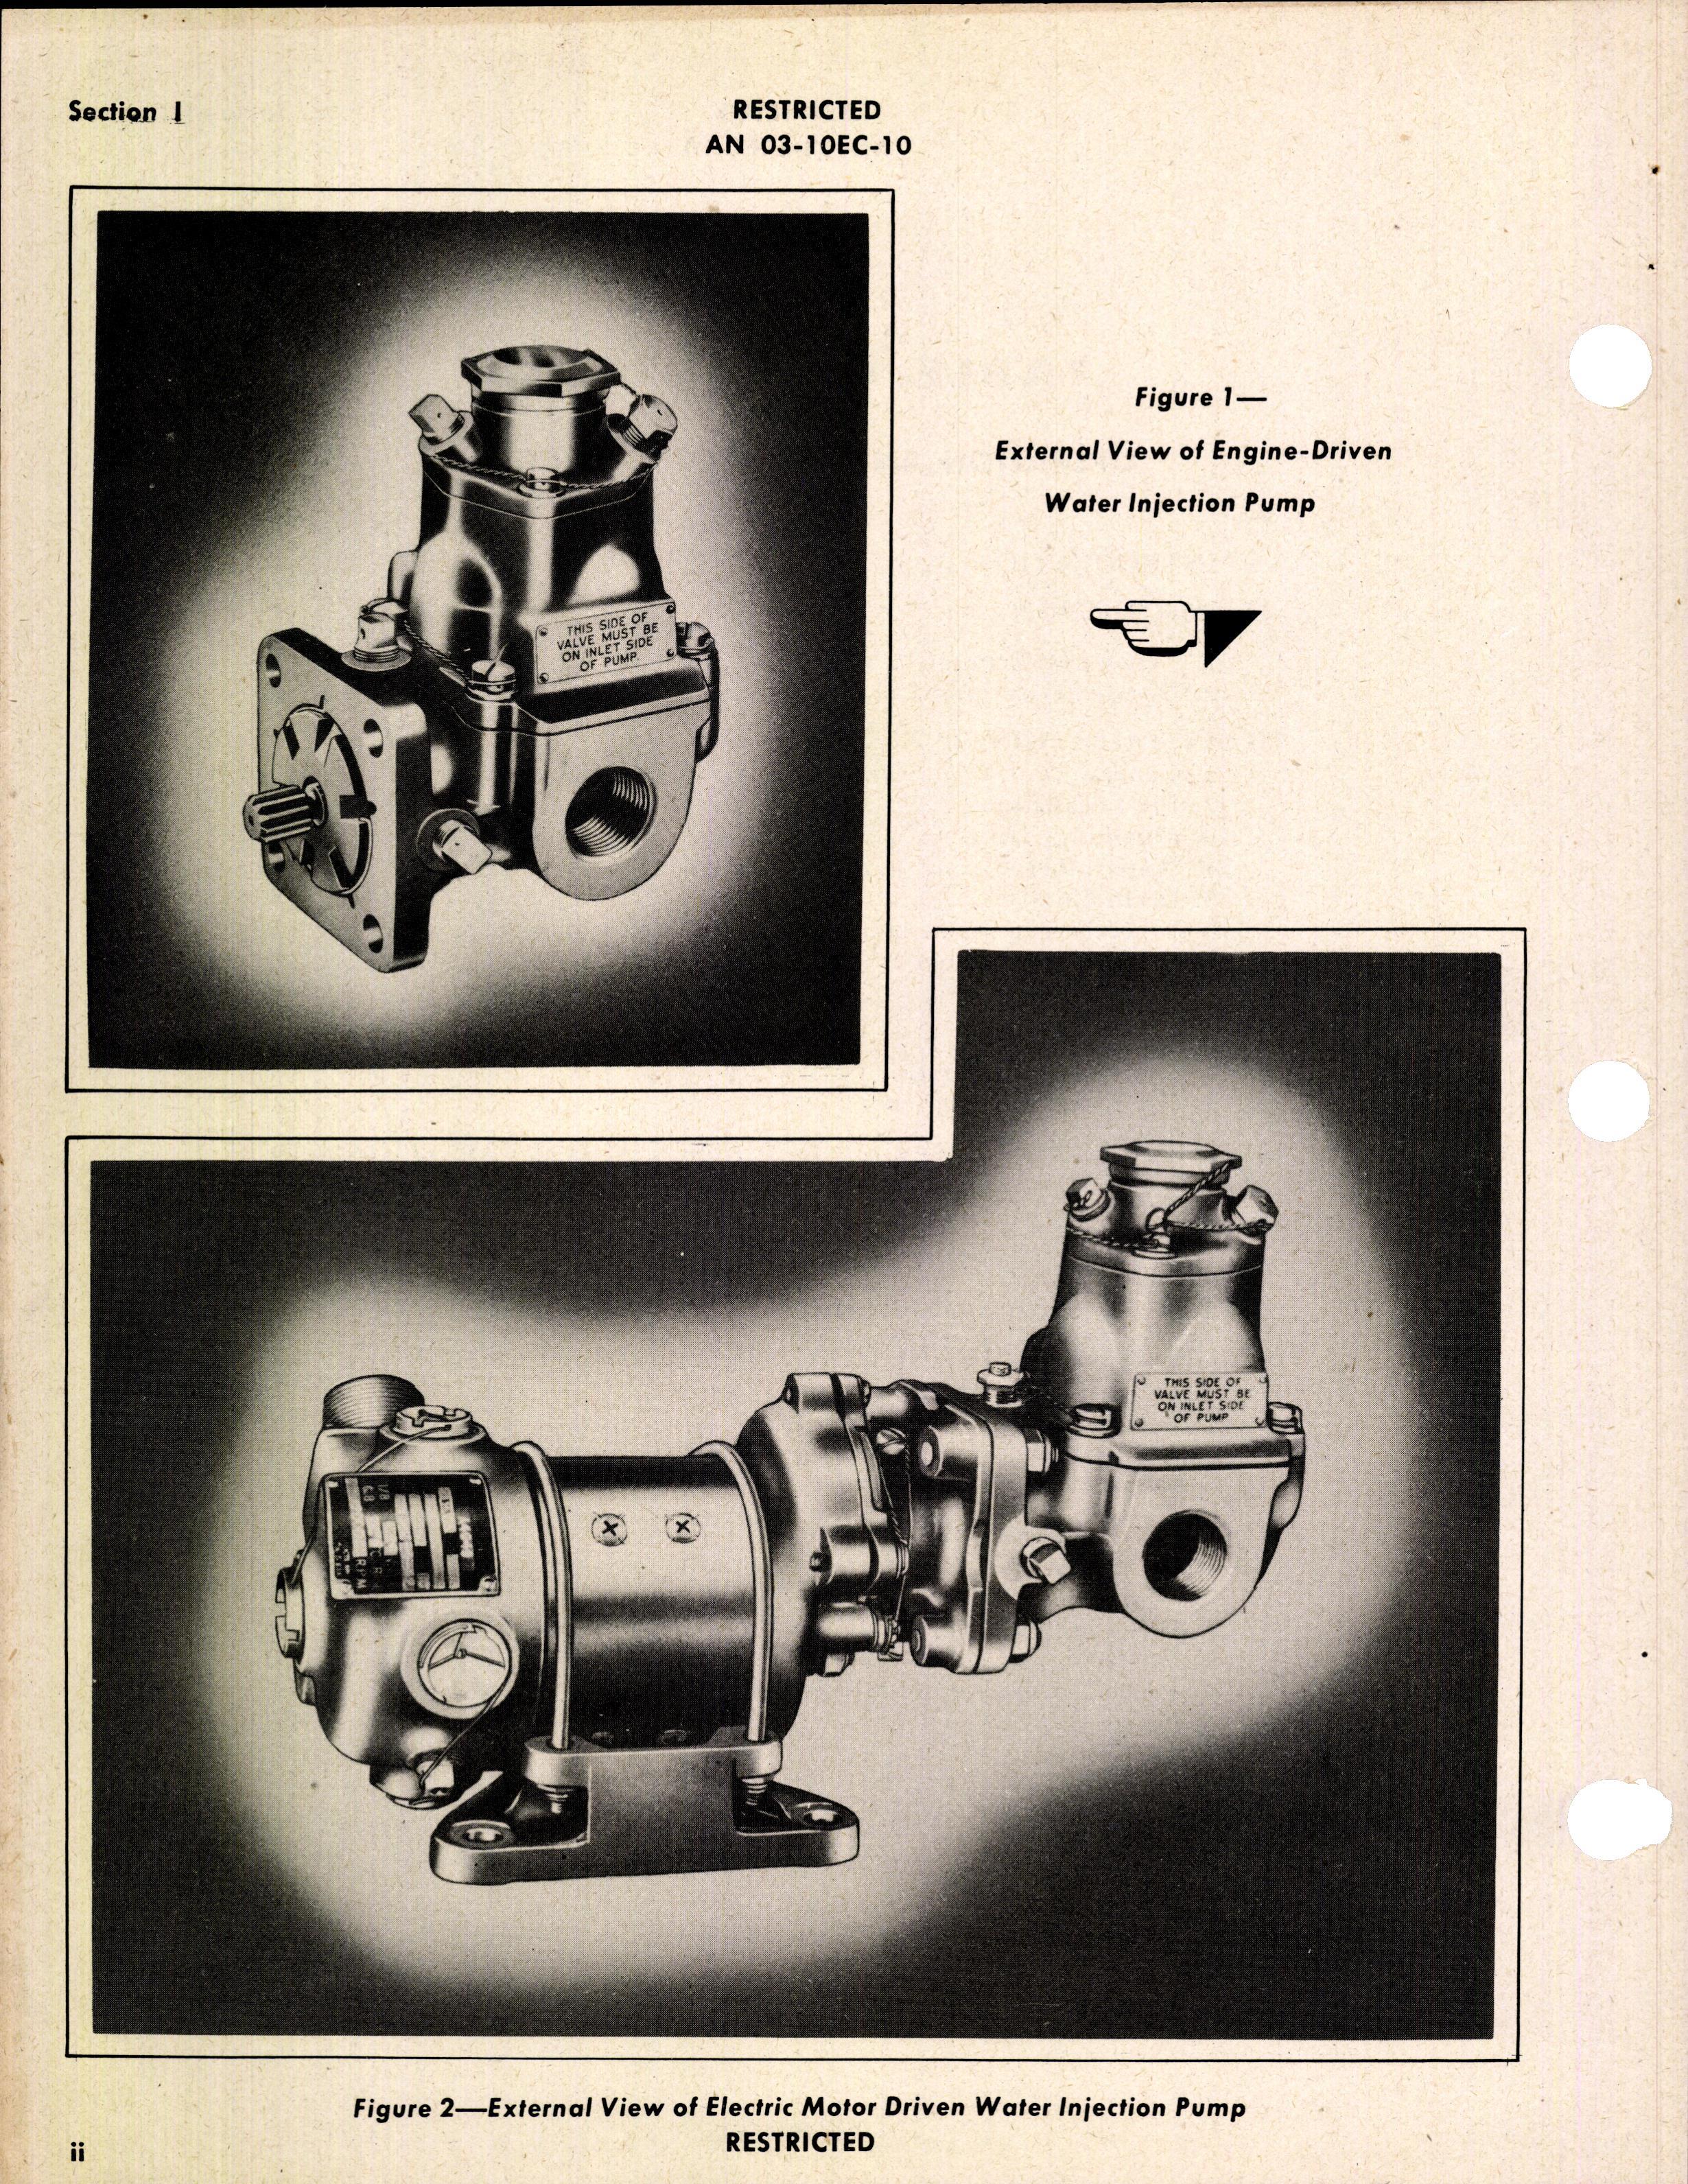 Sample page 4 from AirCorps Library document: Operation, Service, & Overhaul Instructions with Parts Catalog for Engine-Driven & Electric Motor Driven Water Injection Pumps